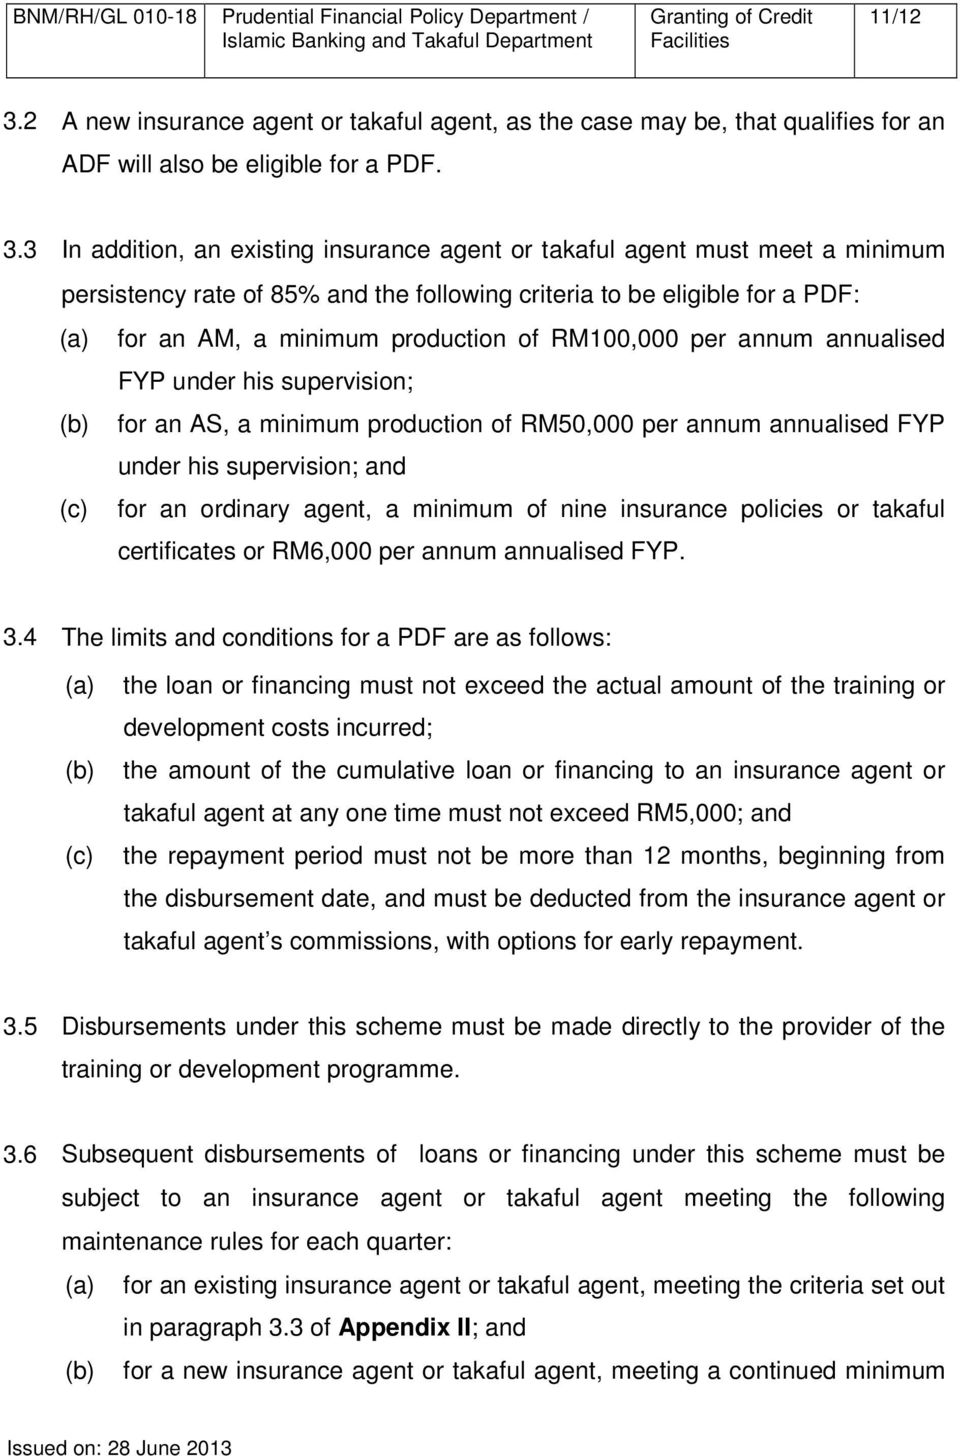 3 In addition, an existing insurance agent or takaful agent must meet a minimum persistency rate of 85% and the following criteria to be eligible for a PDF: (a) for an AM, a minimum production of